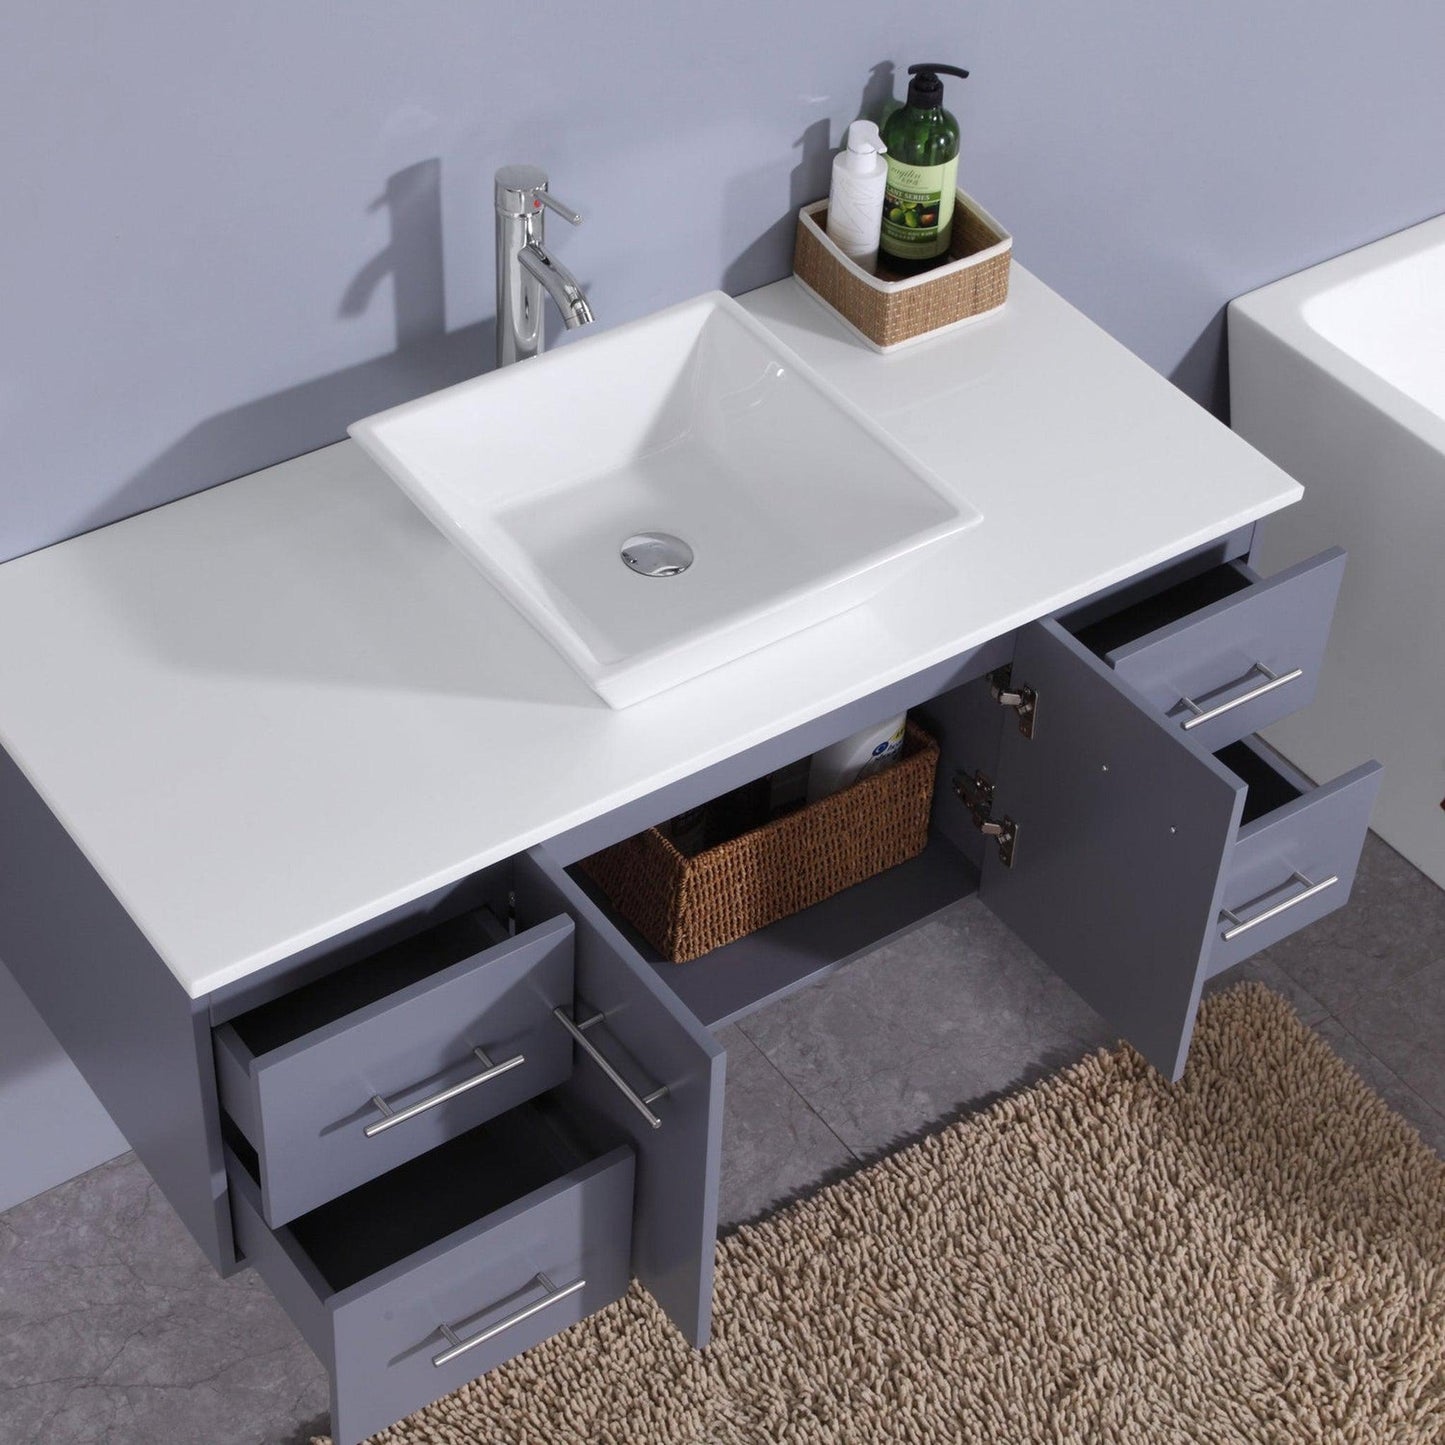 Eviva Totti Wave 48" x 16" Gray Wall-Mounted Bathroom Vanity With White Man-Made Stone Countertop and Single Porcelain Sink